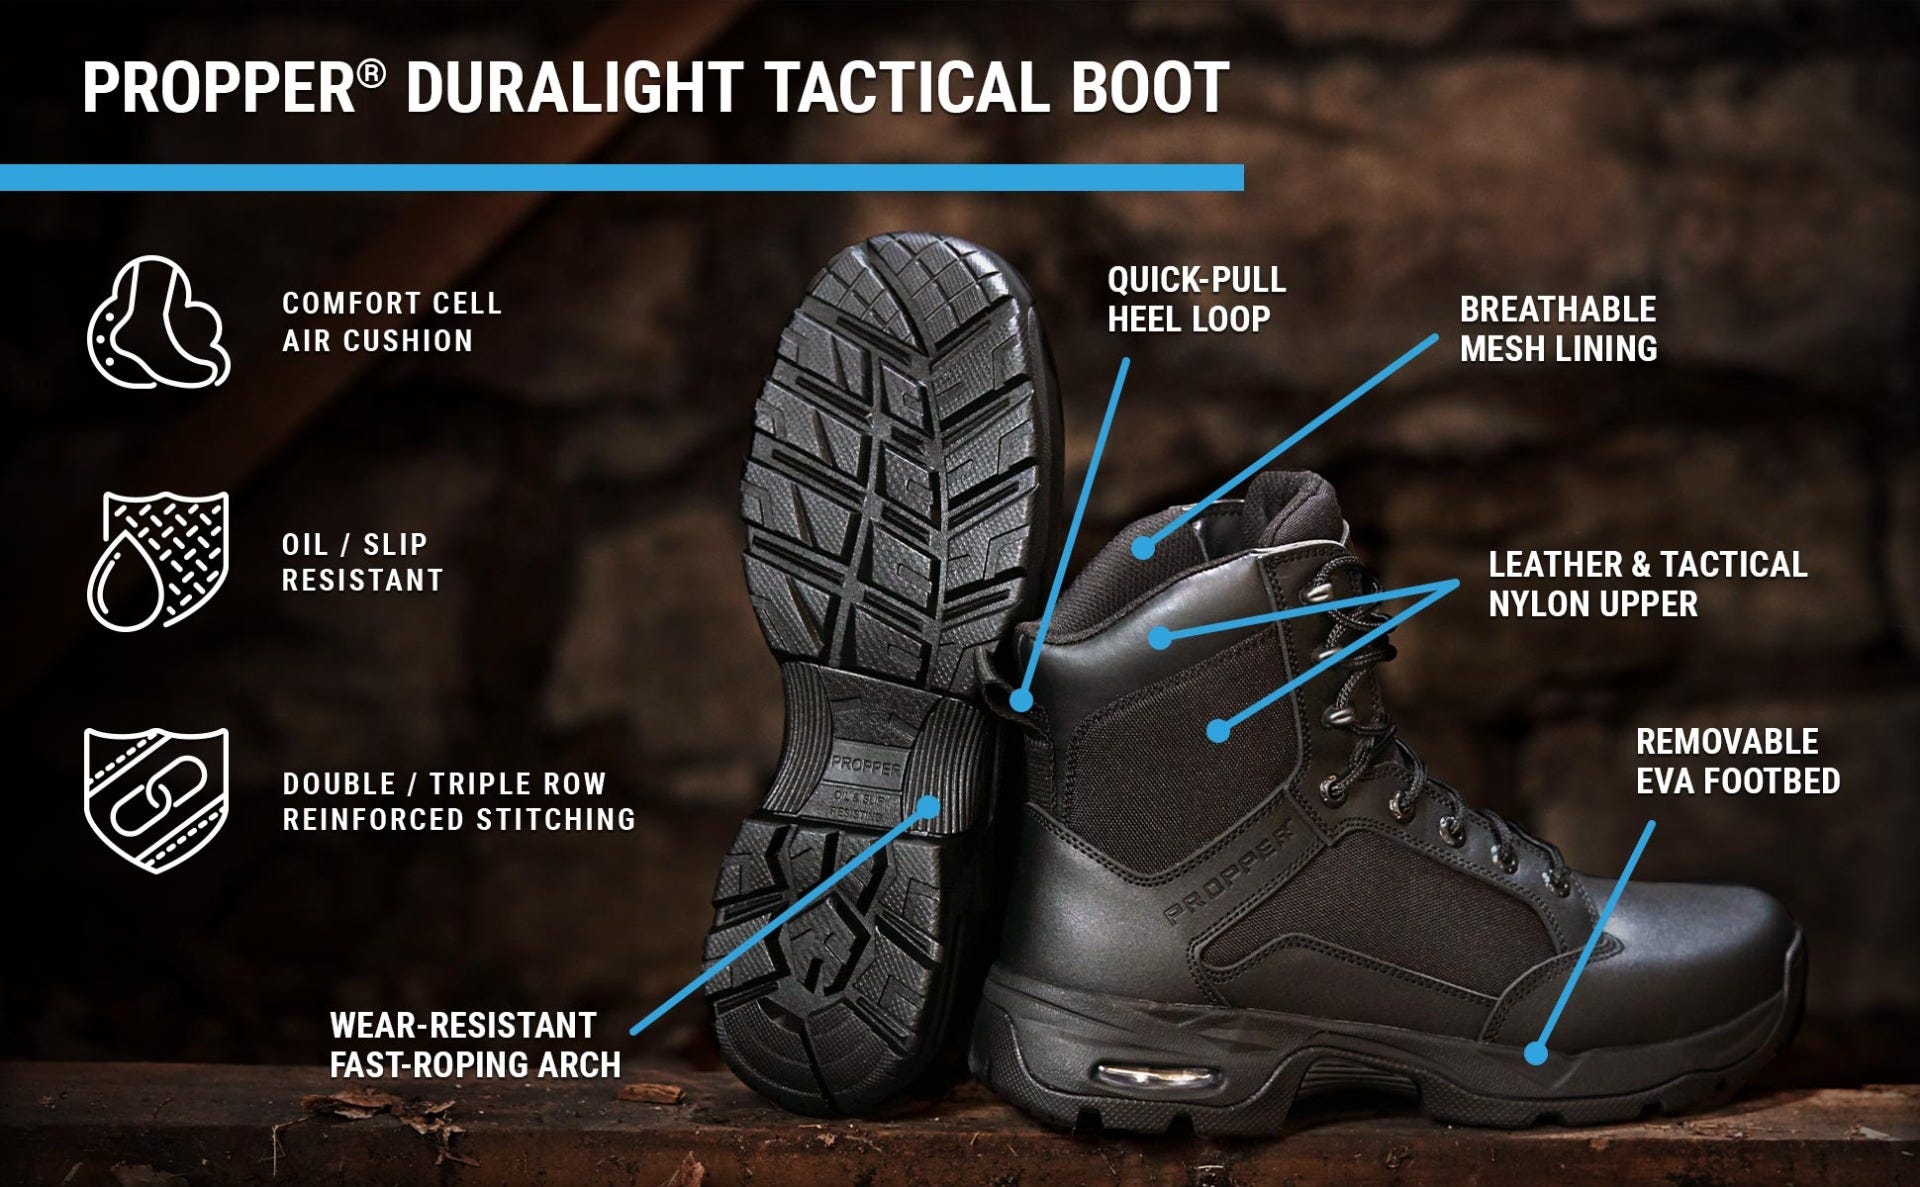 Black Duralight tactical boot has breathable mesh lining, leather upper, removable insert and oil and slip resistance with air cushions.